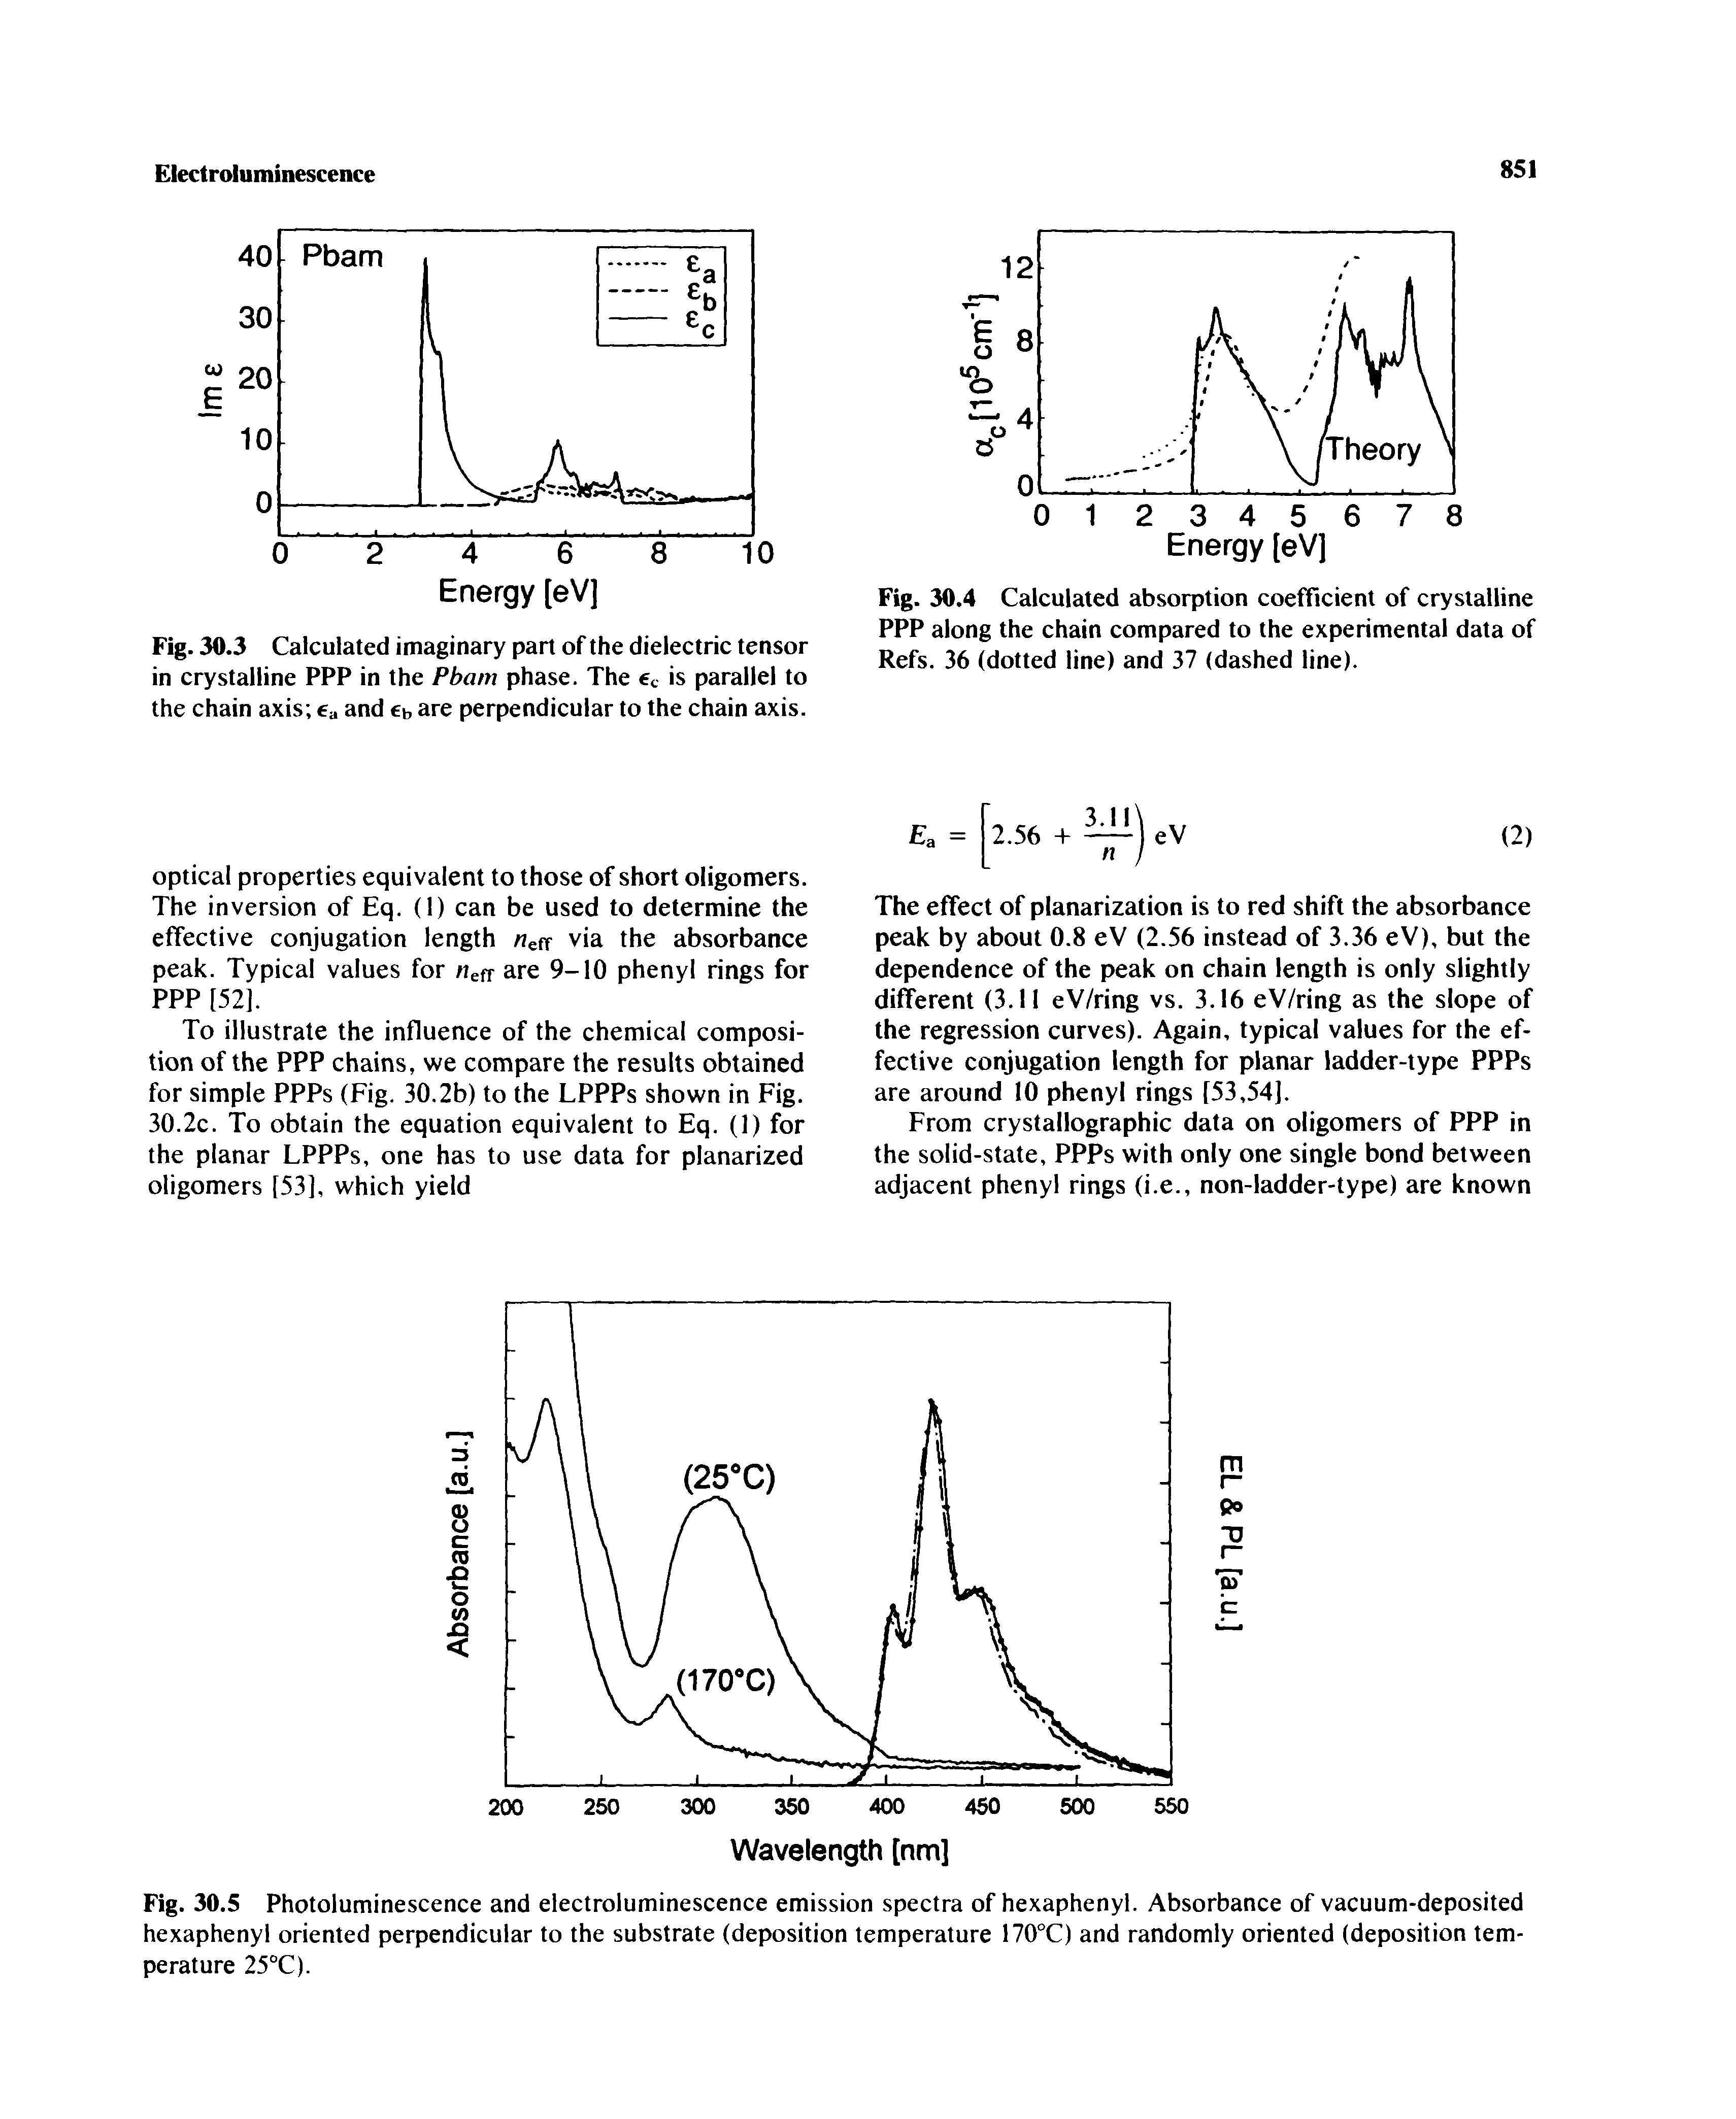 Fig. 30.5 Photoluminescence and electroluminescence emission spectra of hexaphenyl. Absorbance of vacuum-deposited hexaphenyl oriented perpendicular to the substrate (deposition temperature 170°C) and randomly oriented (deposition temperature 25°C).